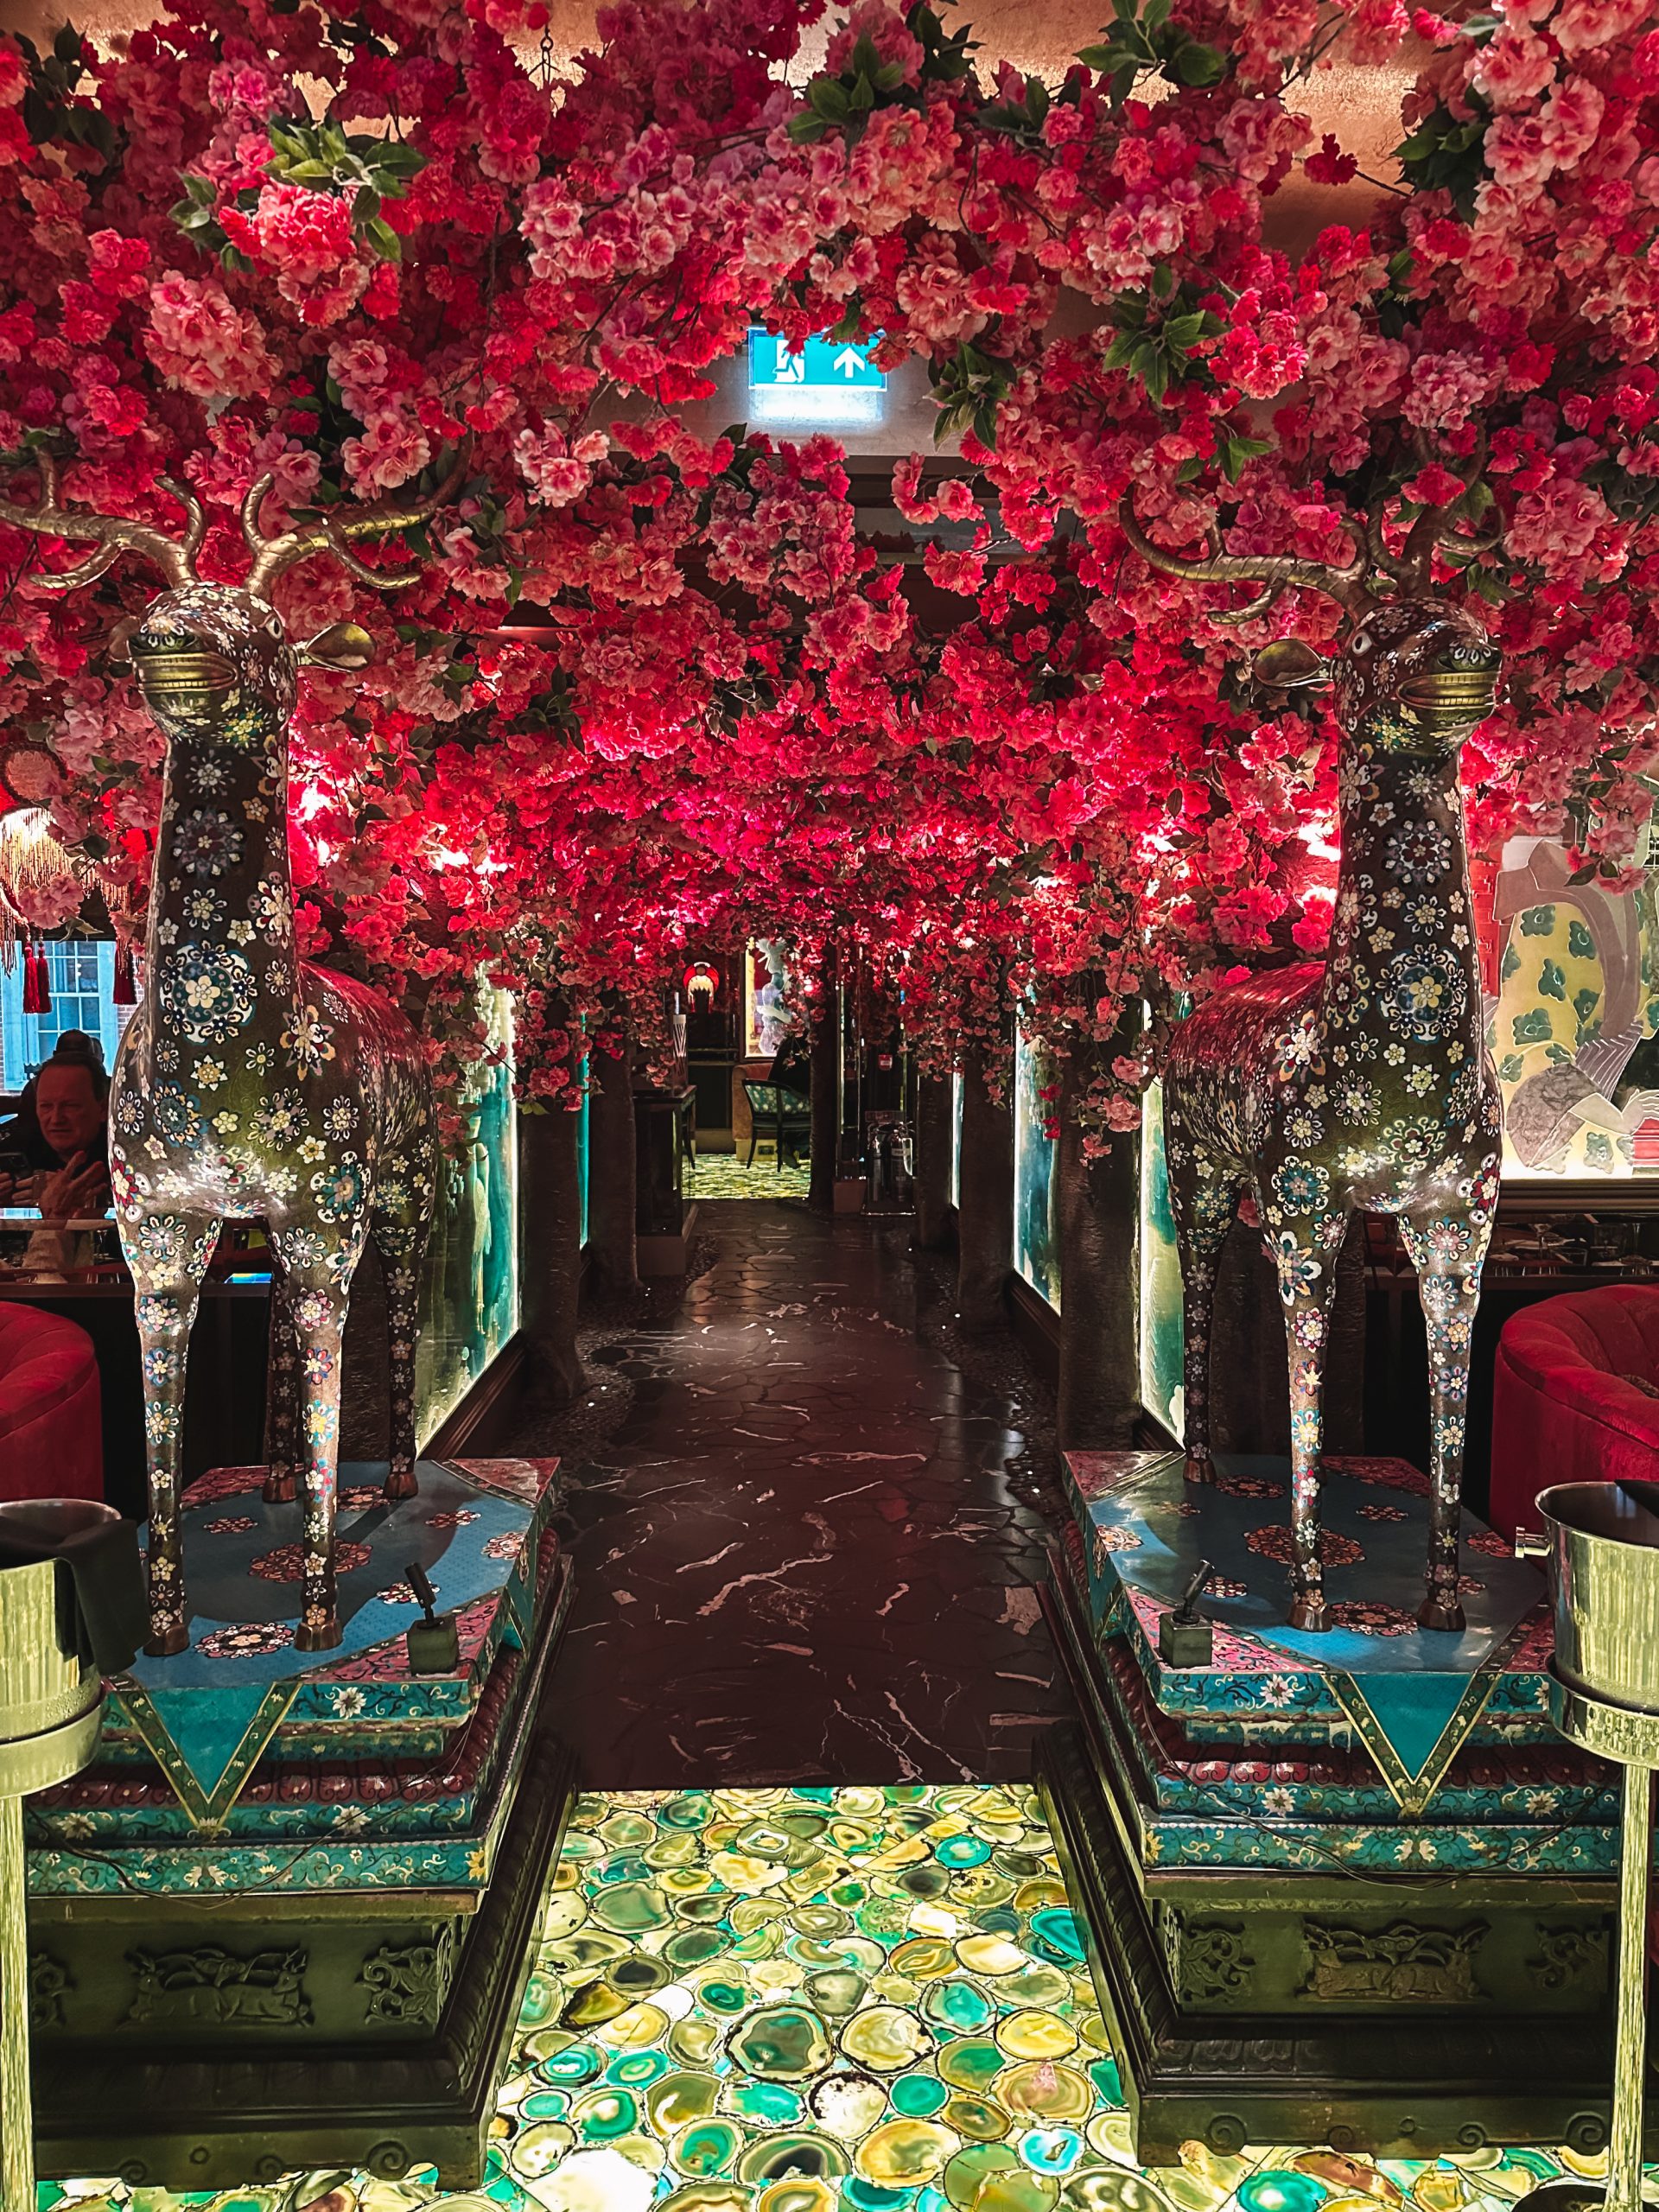 The Ivy Asia Mayfair, London